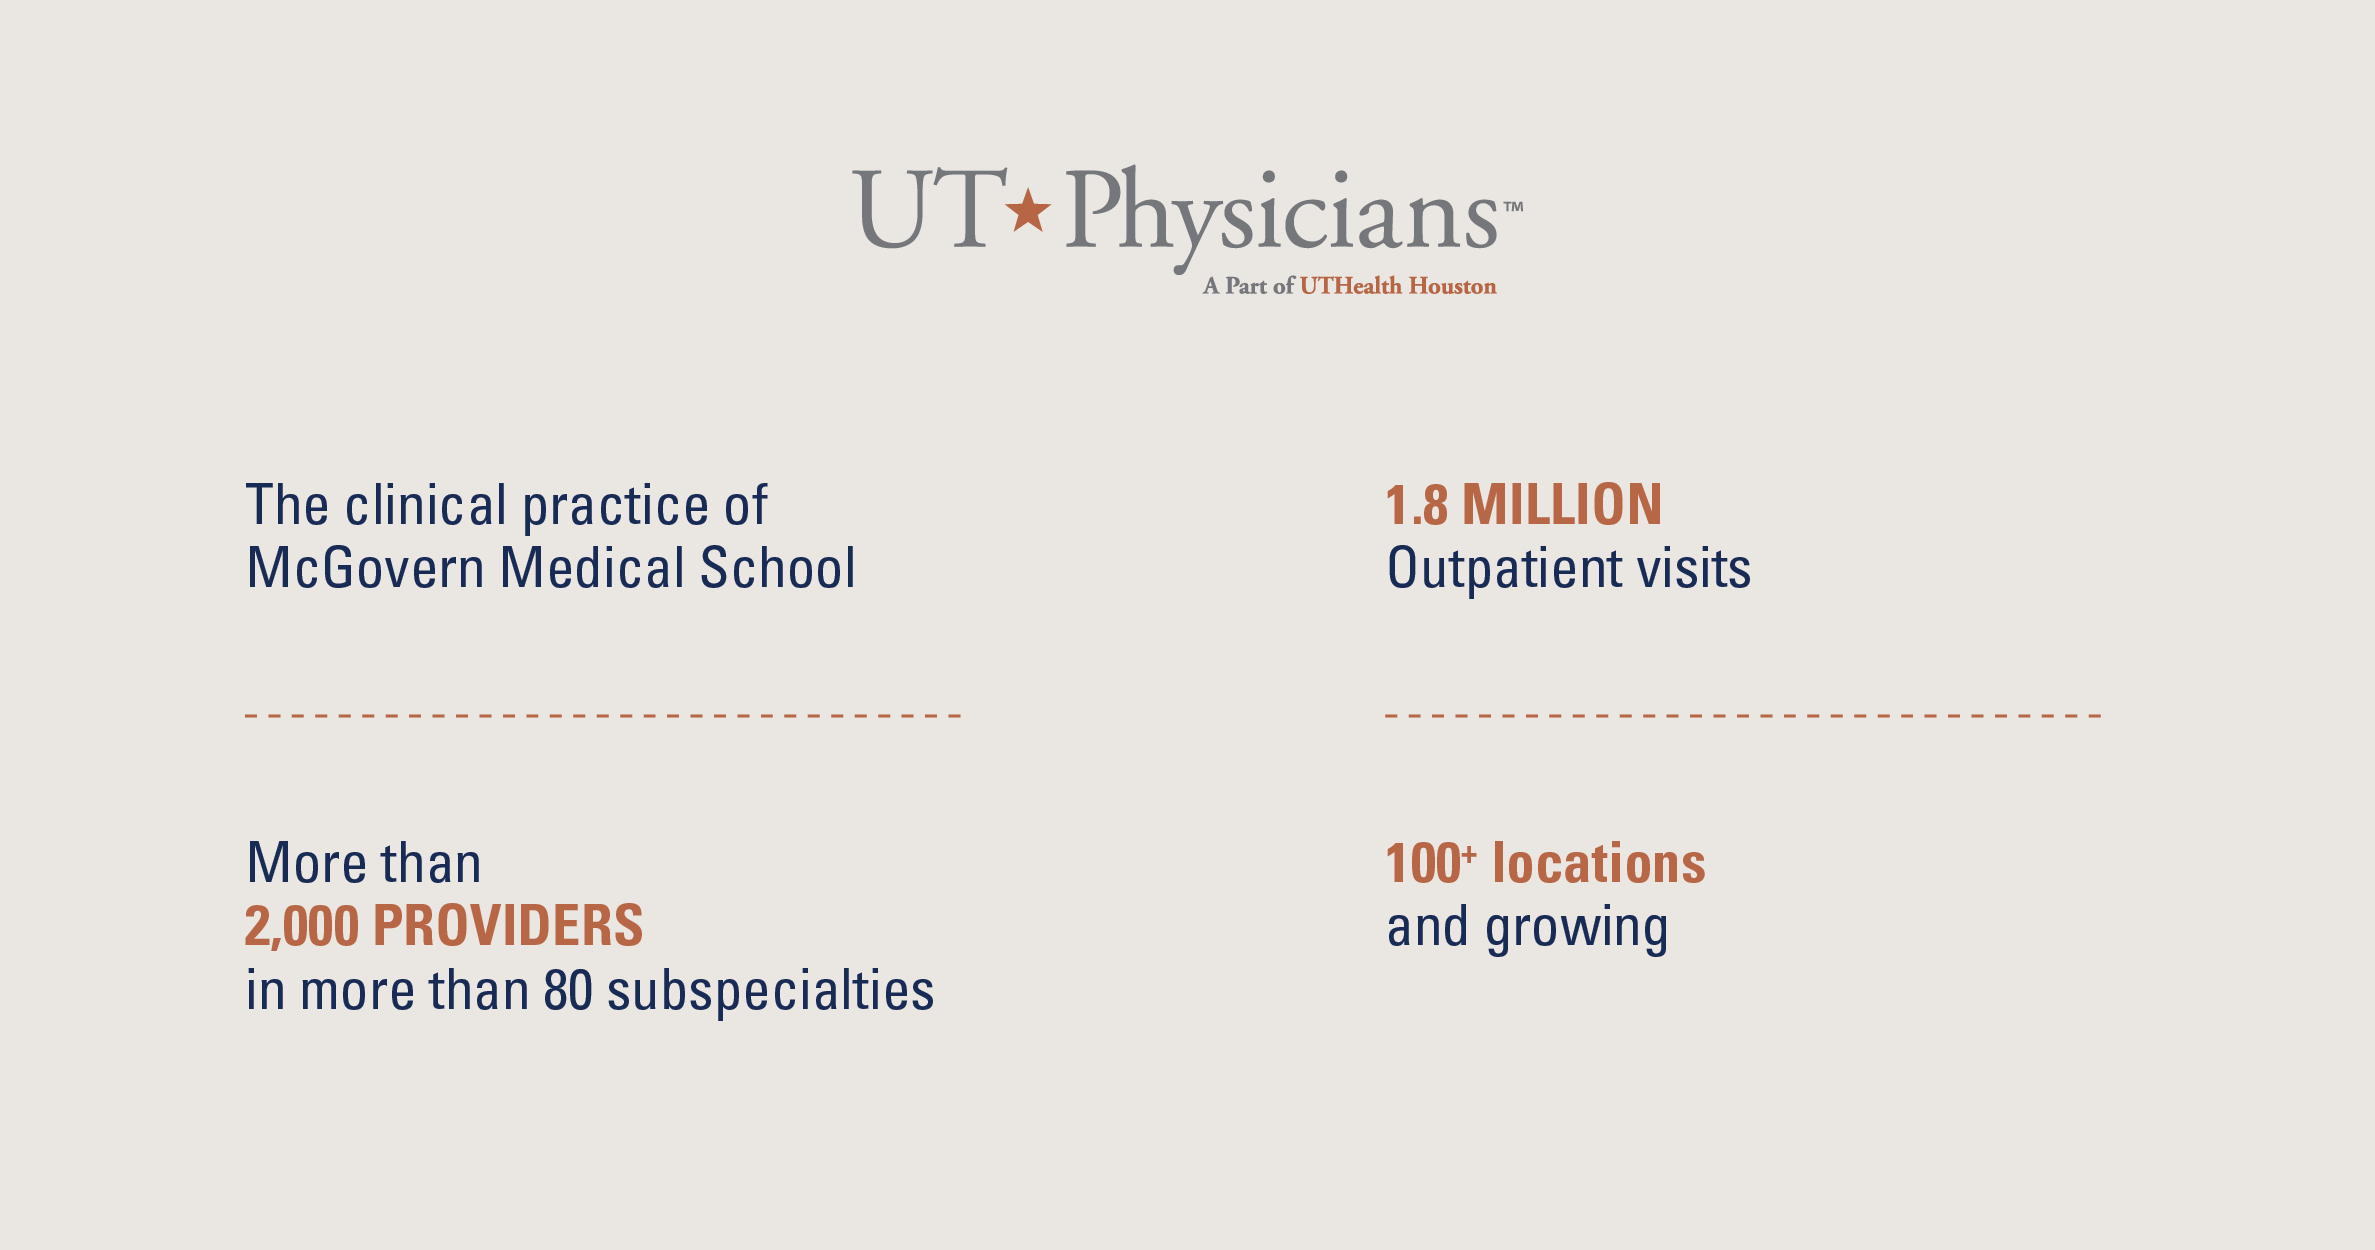 Statistics describing UTPhysicians as the clinical practice of McGovern Medical School with more than 2,000 providers and 100 locations